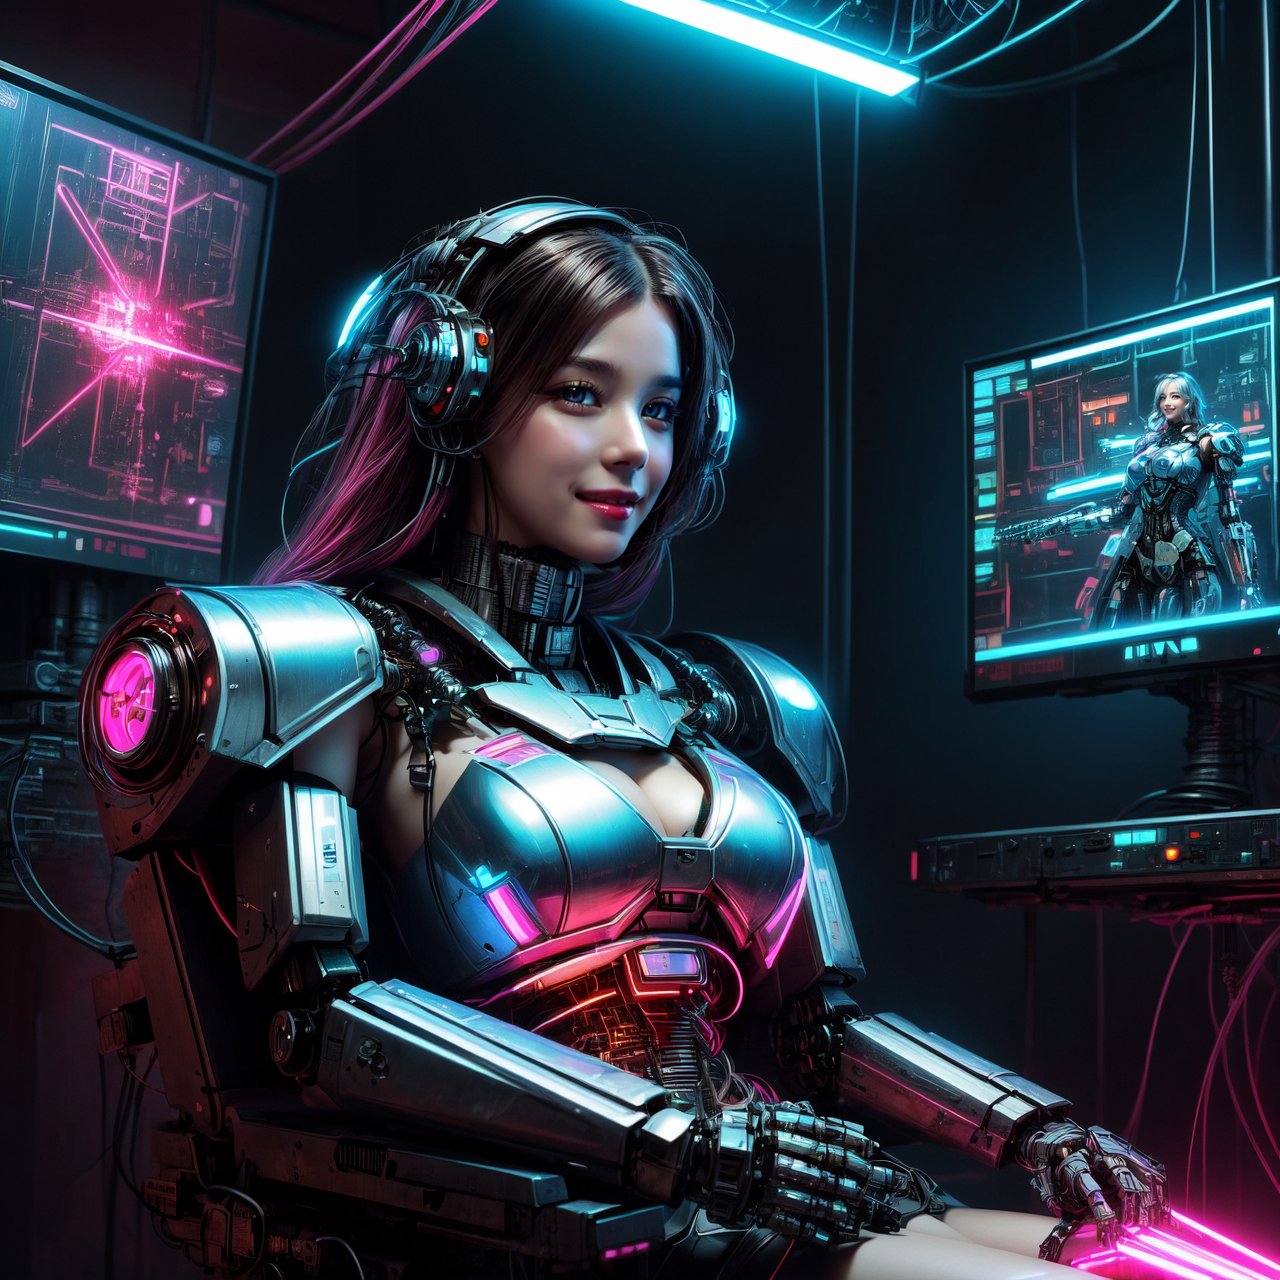 High-quality, photorealistic digital art, 64K HDR, cyberpunk laboratory scene featuring a girl in mechanized armor sitting in an electric chair, intertwined with wires and instruments, symmetric composition, (Cyberpunk:1.4), (Mecha-armored girl:1.3), futuristic, techno-dystopian atmosphere, advanced technology, metallic textures, neon lighting, dark ambiance, Pink Mecha, 